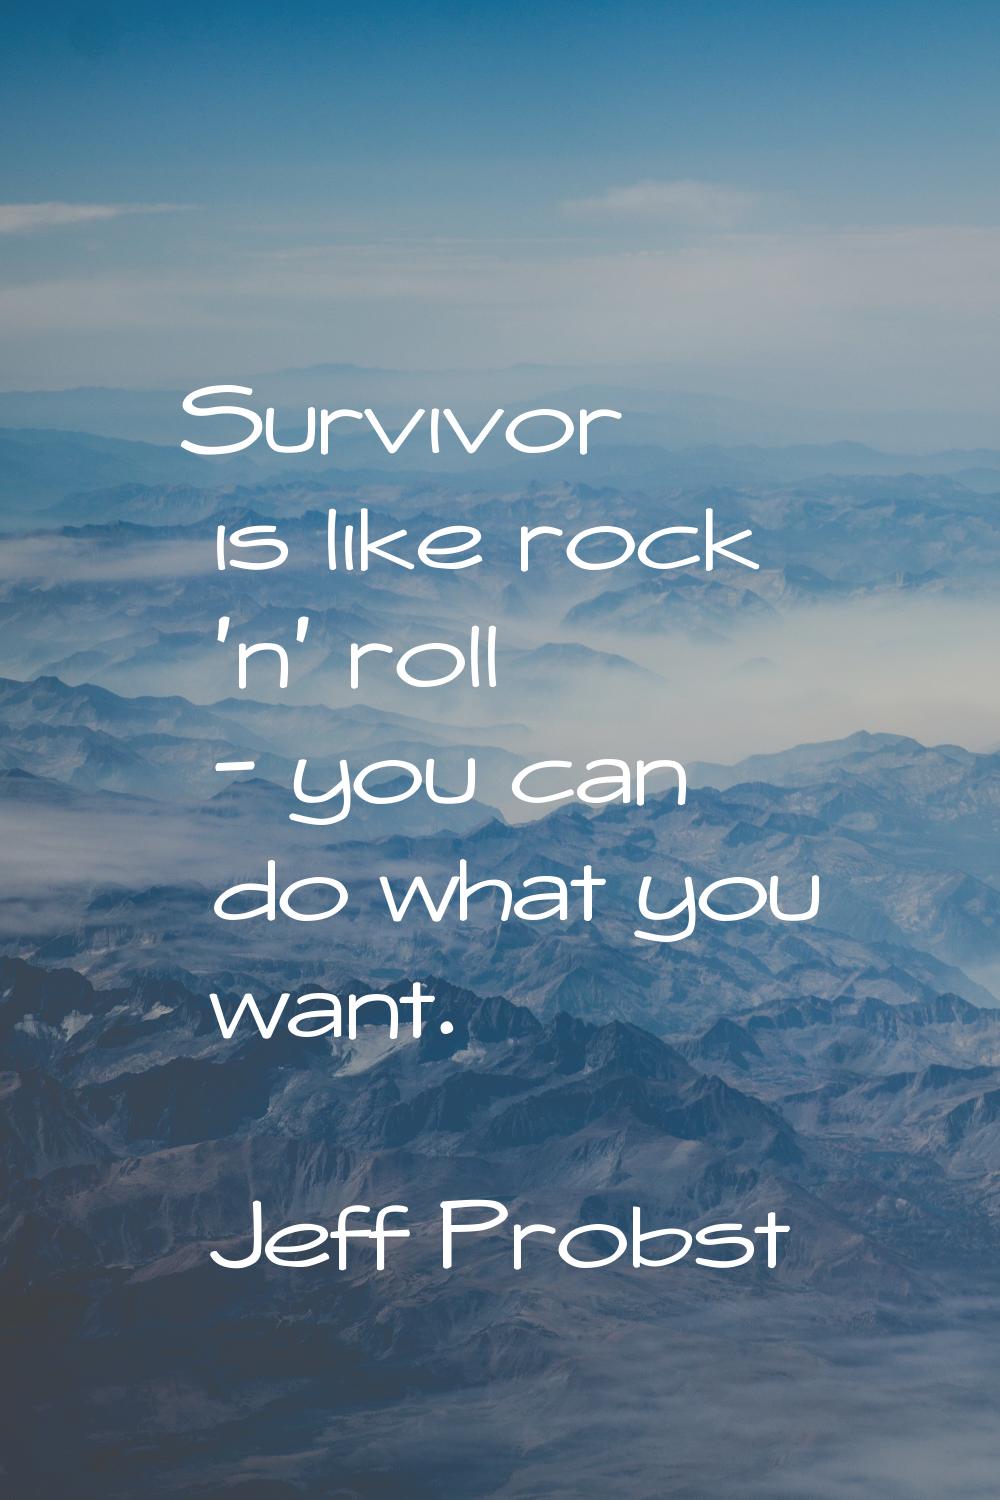 Survivor is like rock 'n' roll - you can do what you want.